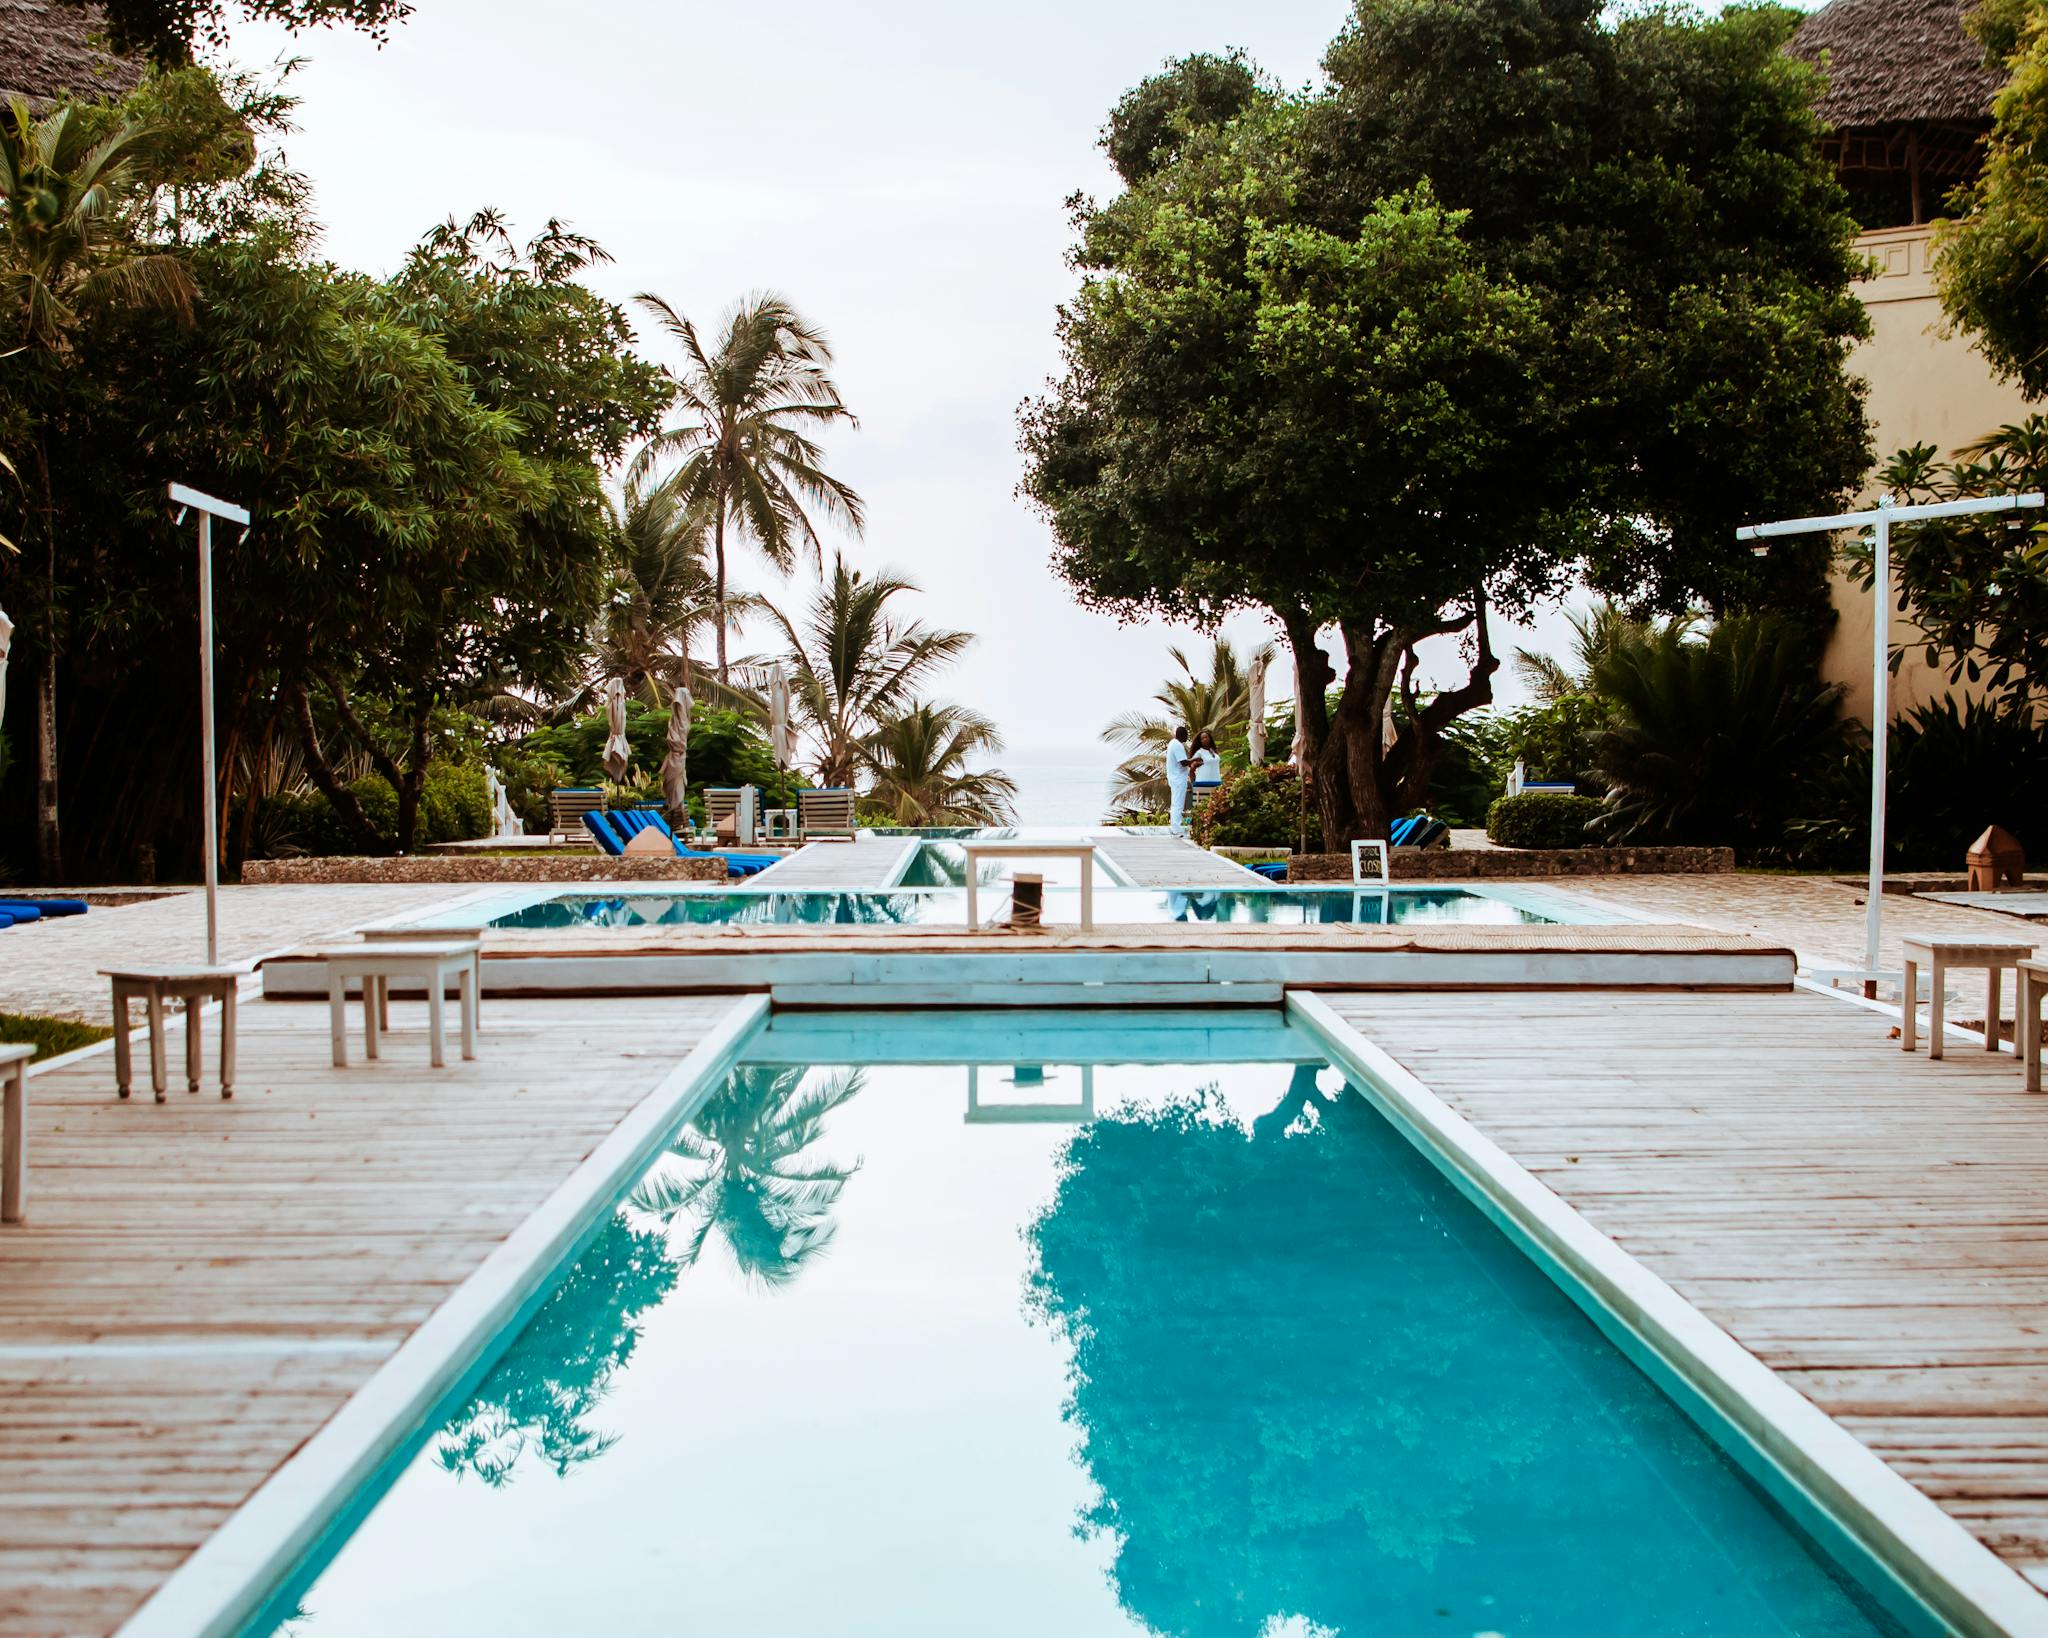 Swimming pool on hotel terrace near tropical trees